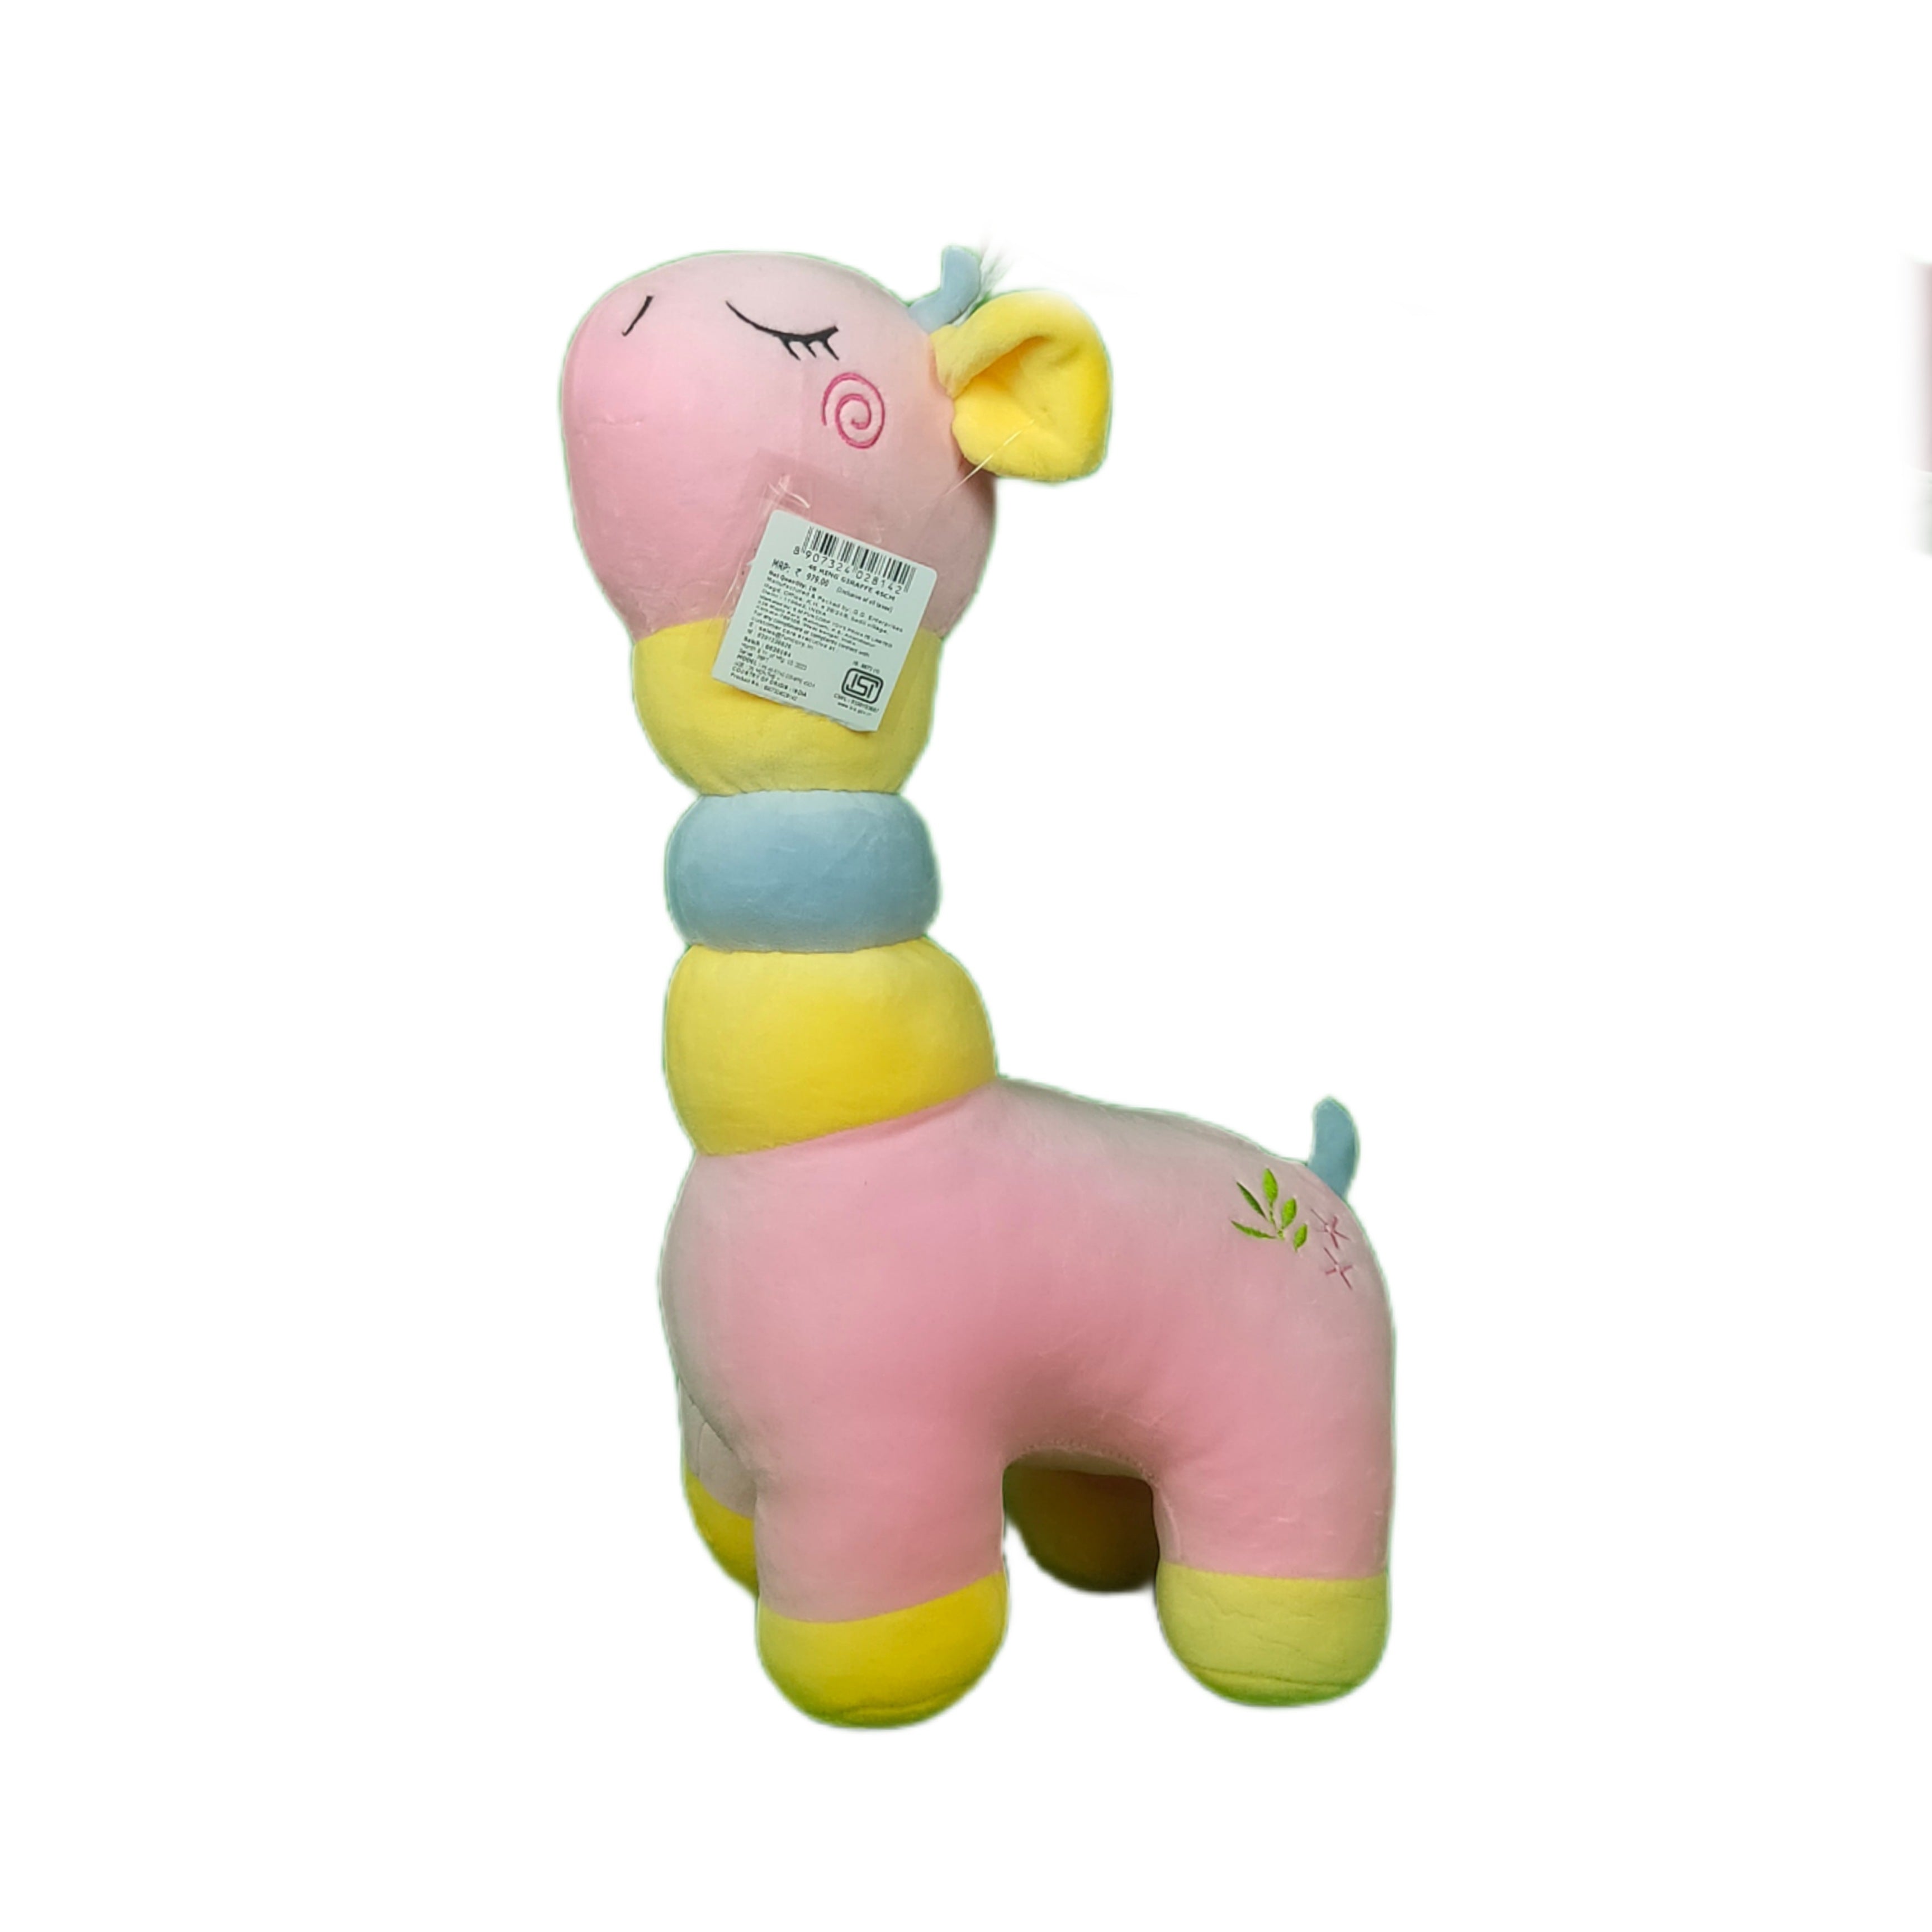 Play Hour Ring Giraffe Plush Soft Toy for Ages 3 Years and Up, Baby Pink, 45cm